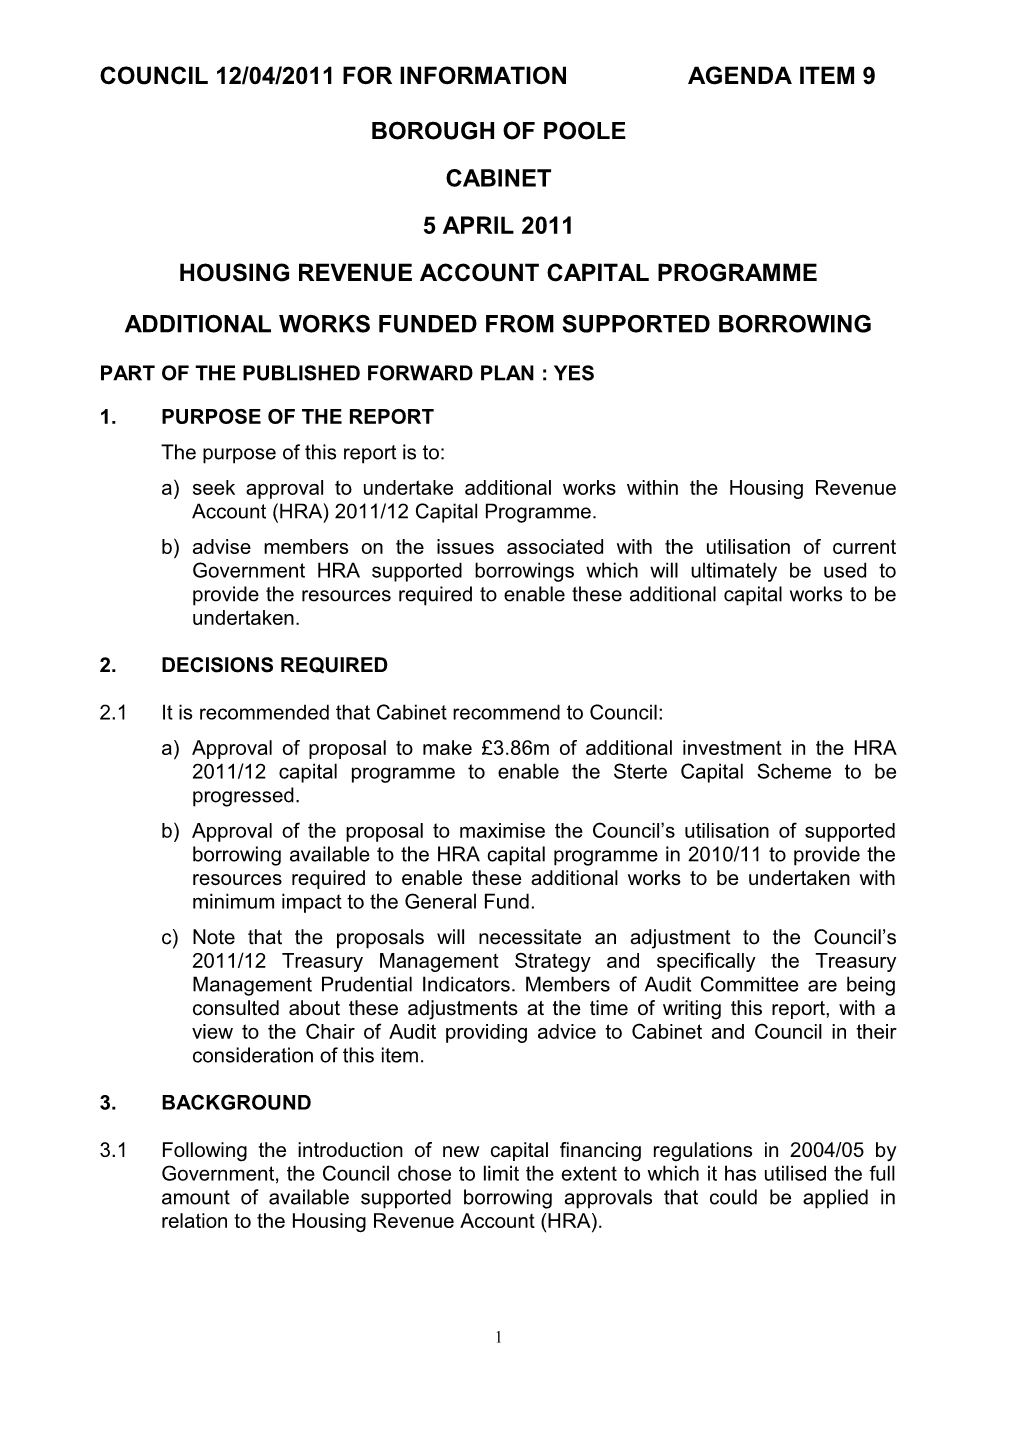 Housing Revenue Account Capital Programme - Additional Works Funded from Supported Borrowing